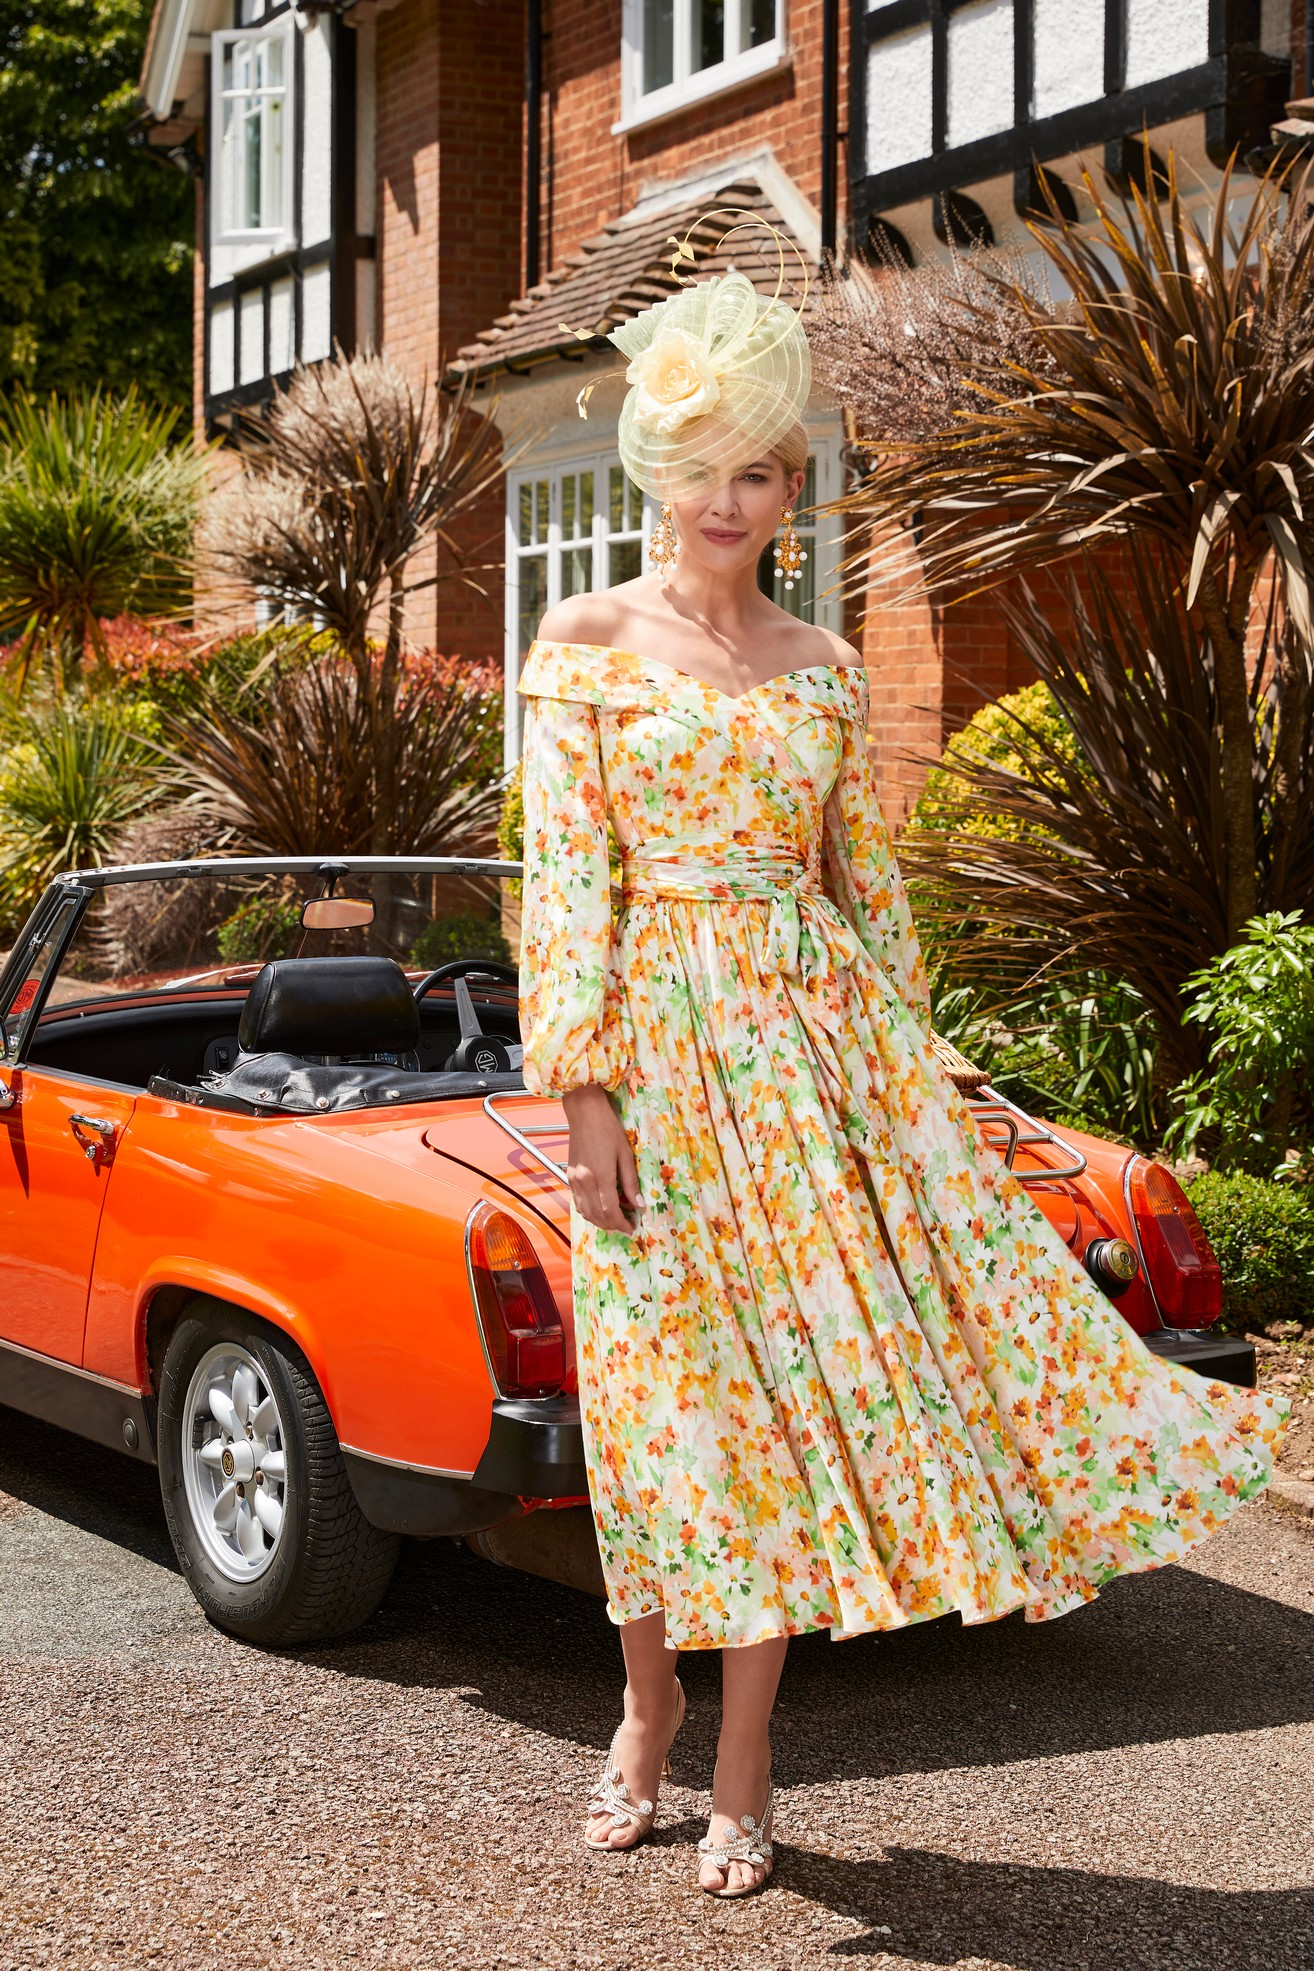 Woman in vivid yellow and orange floral a-line dress with off the shoulder detail and long blouson sleeves standing in front of vintage orange car